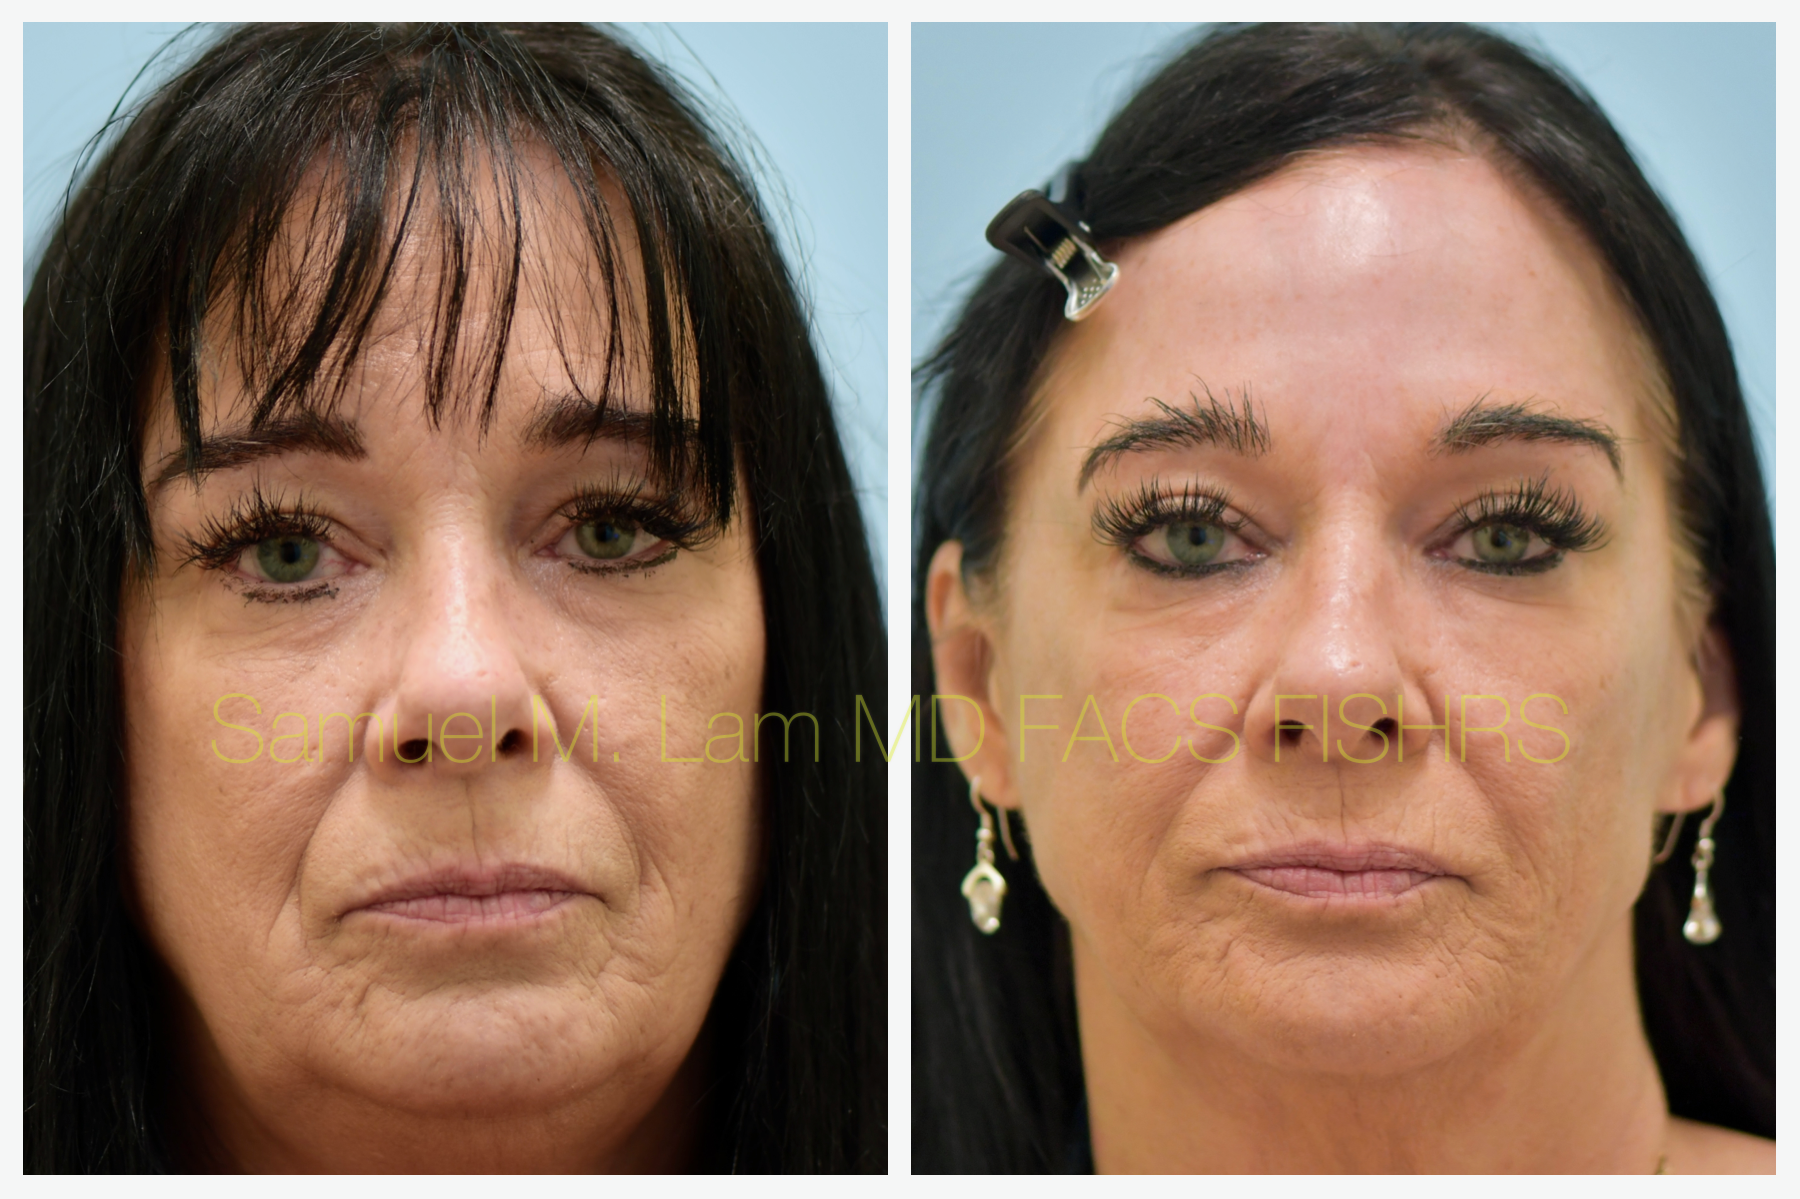 Dallas Botox Before and After Photos - Plano Plastic Surgery Photo Gallery  - Dr. Sam LamBotox Archives